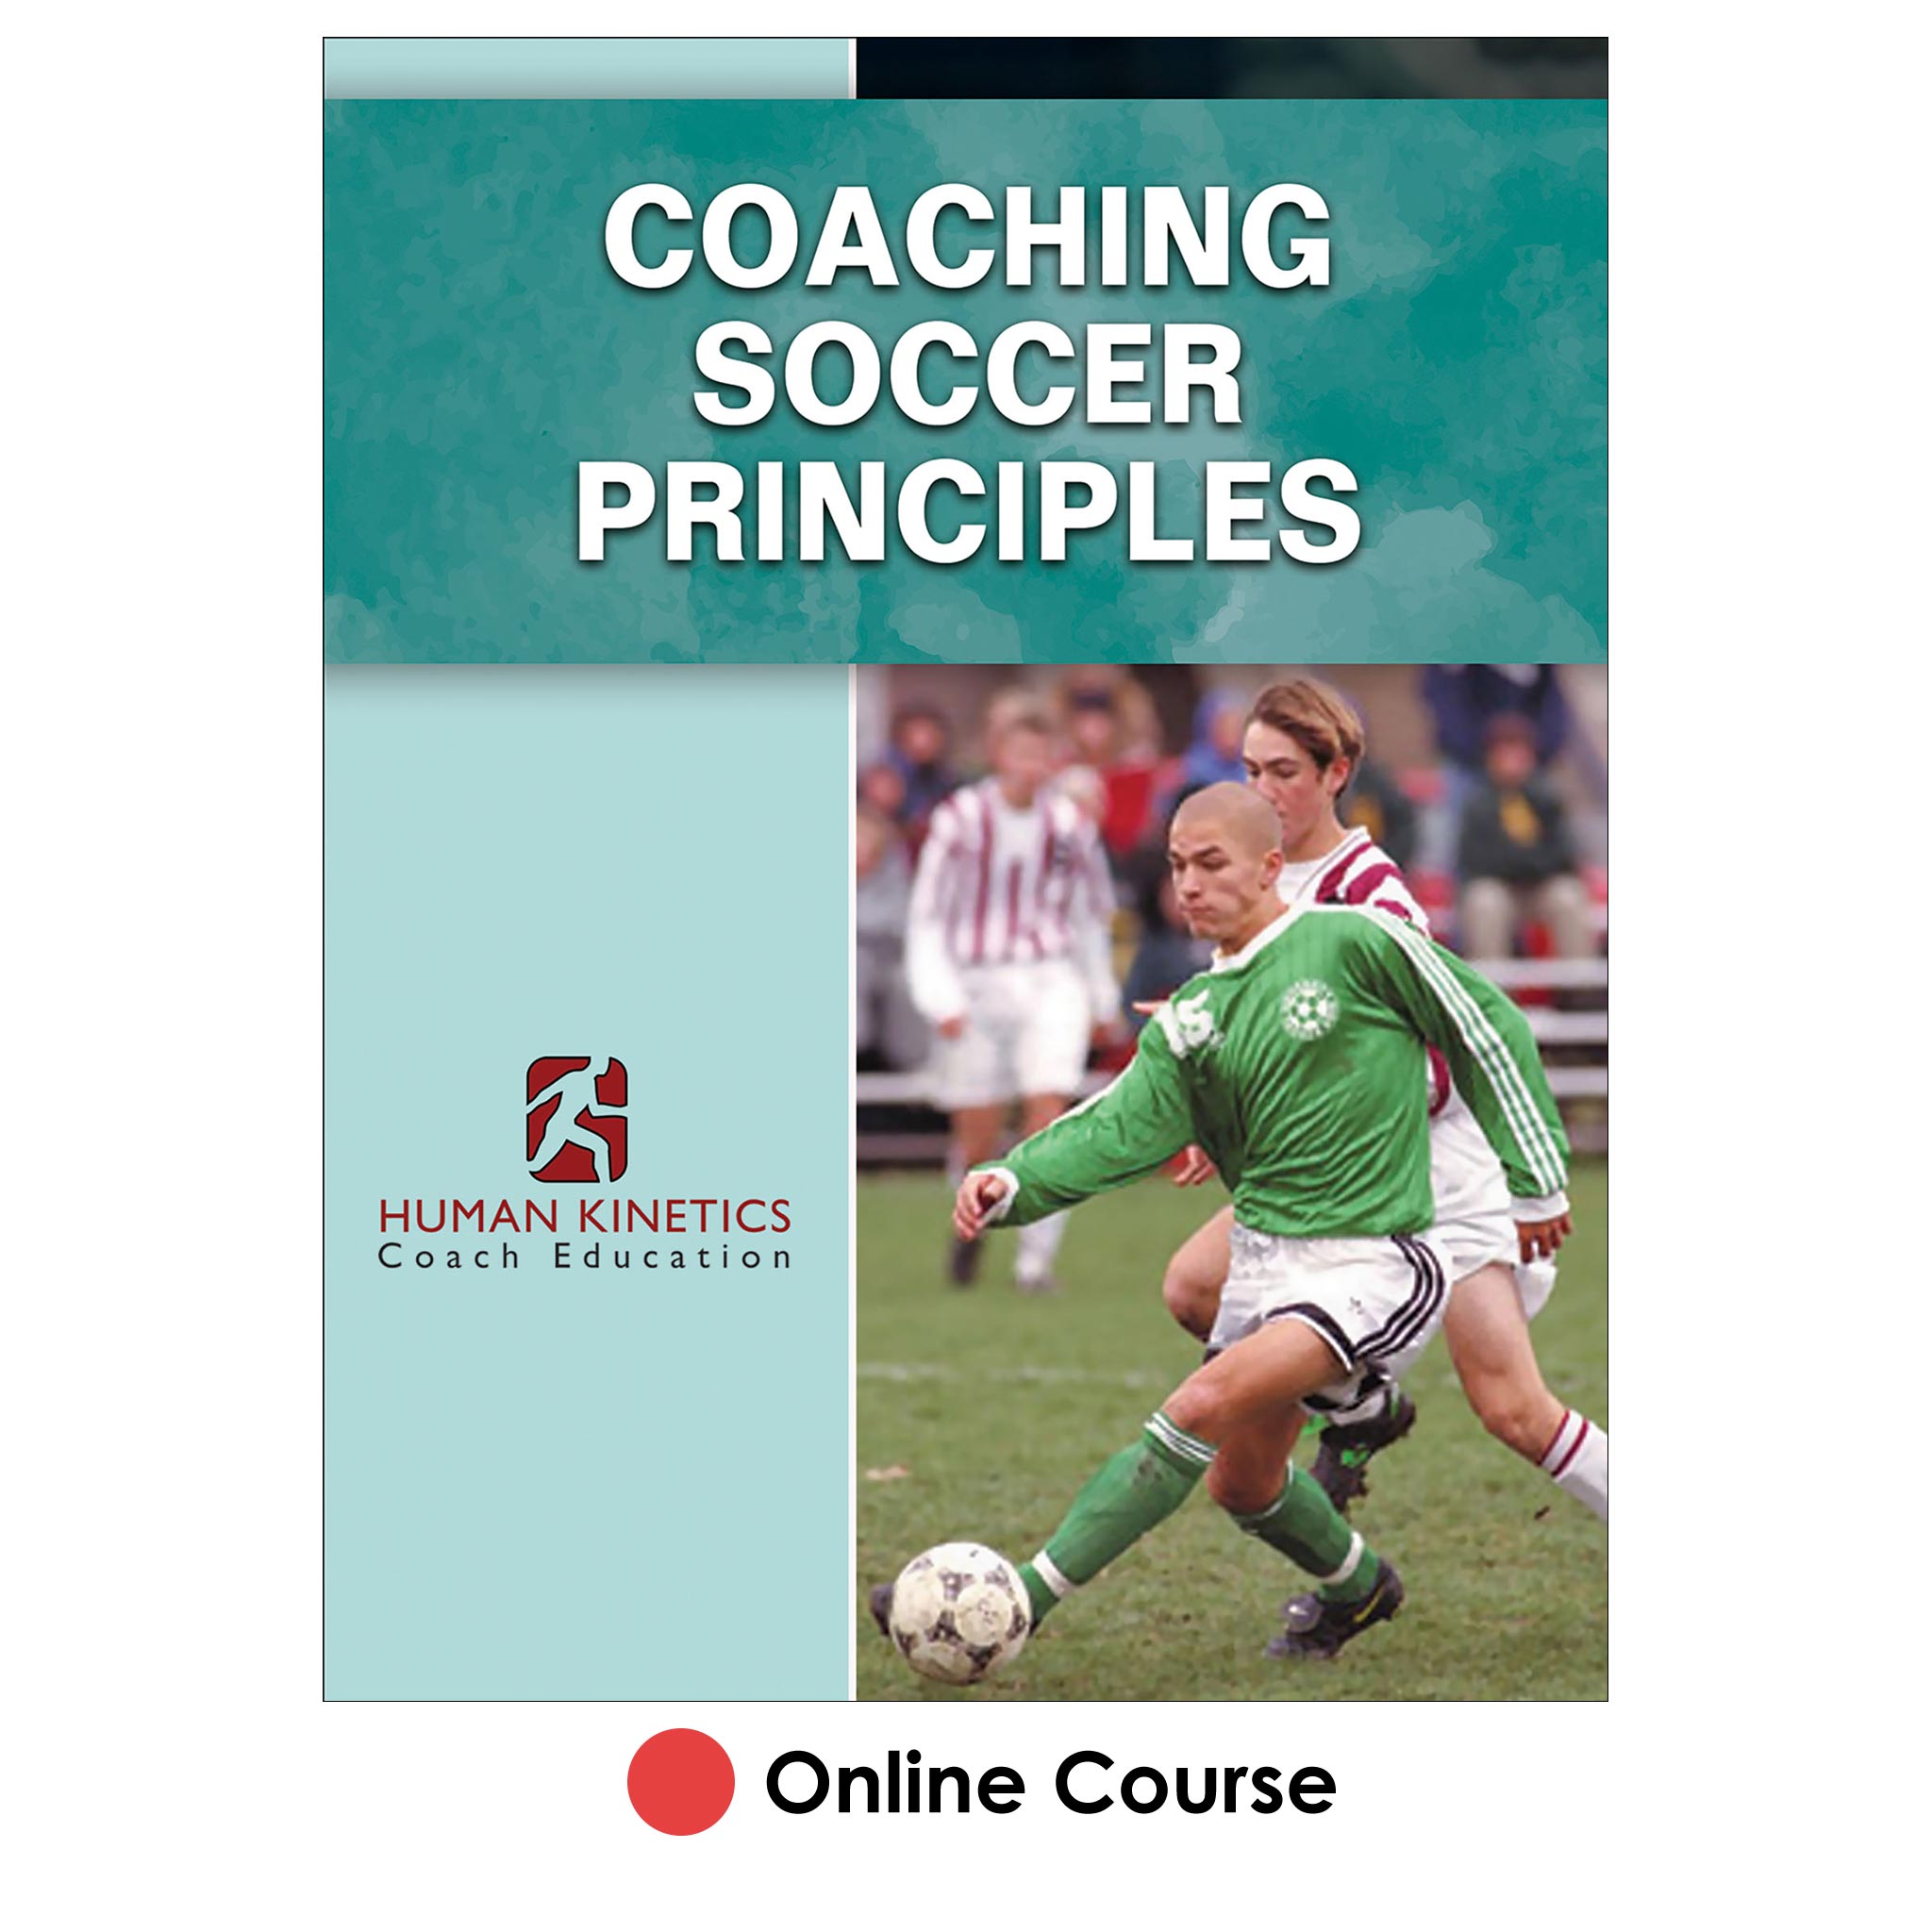 Coaching Soccer Principles 2nd Edition Online Course